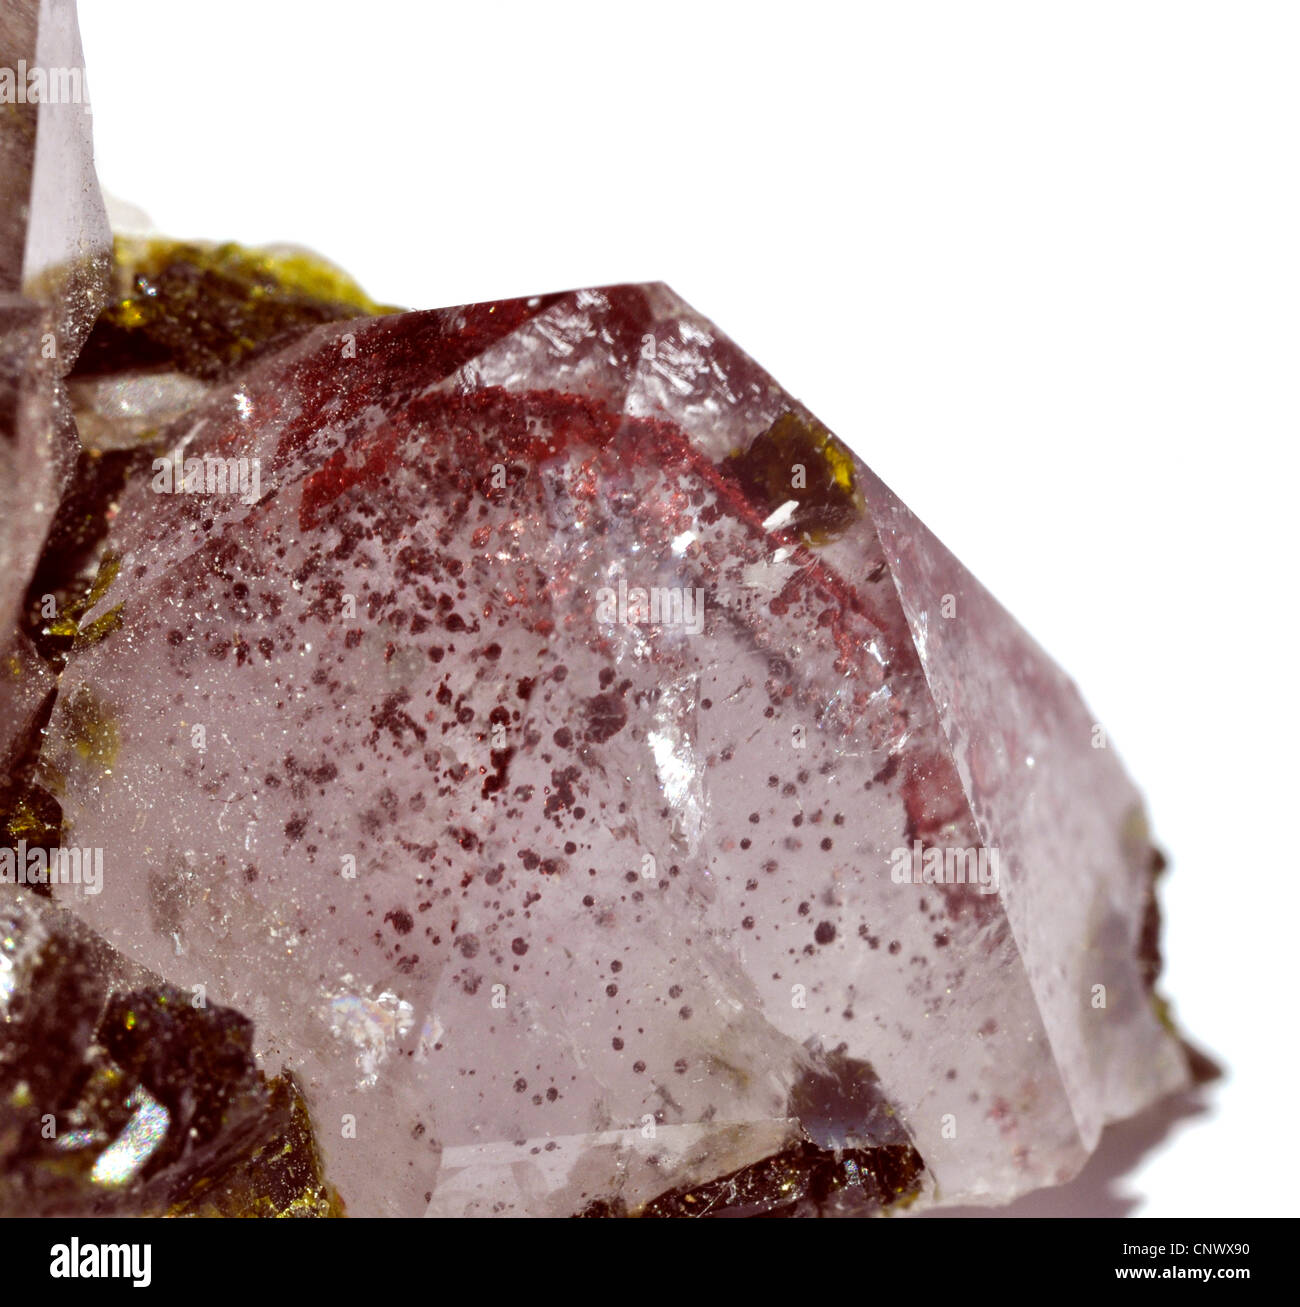 rock crystal with epidote crystals and inclusions of haematite Stock Photo